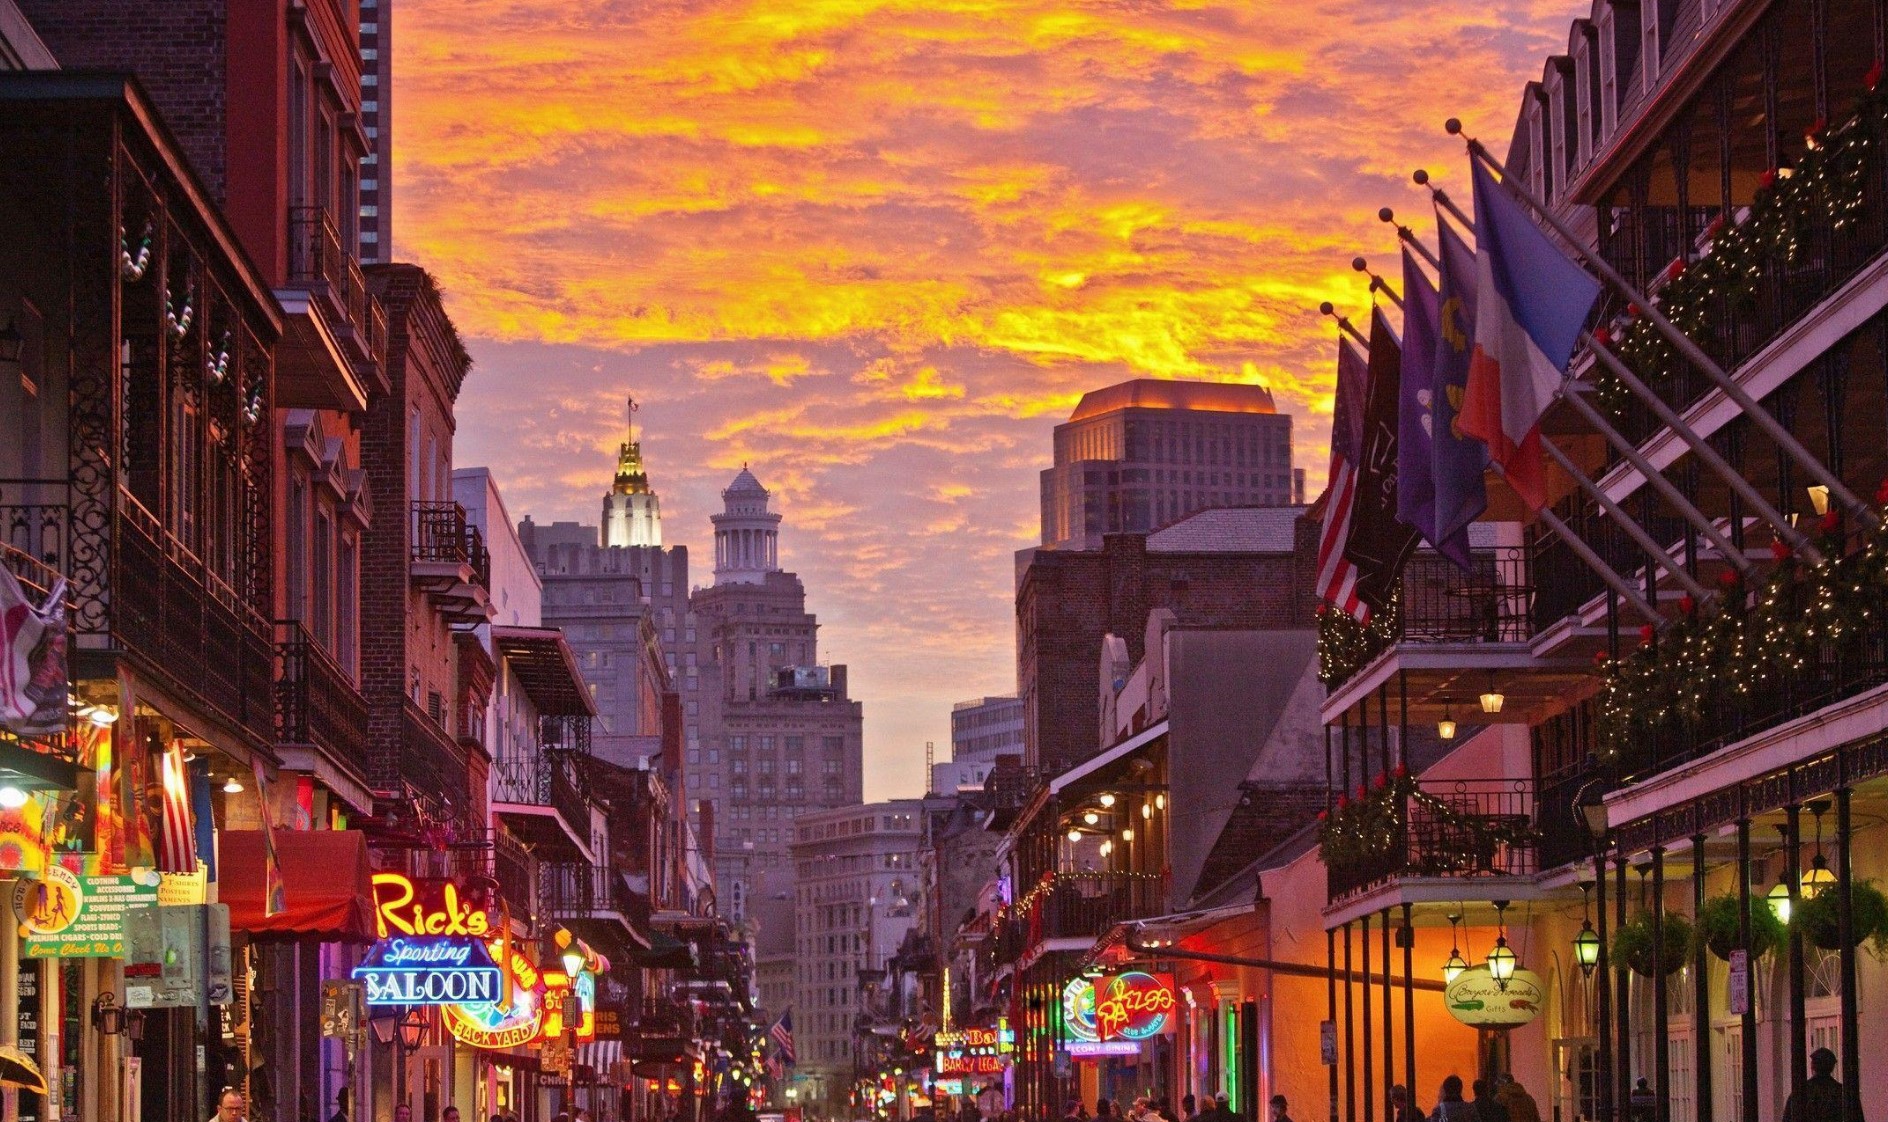 Sunset over Bourbon Street in New Orleans, with the sky ablaze in warm hues above the vibrant streets of the French Quarter